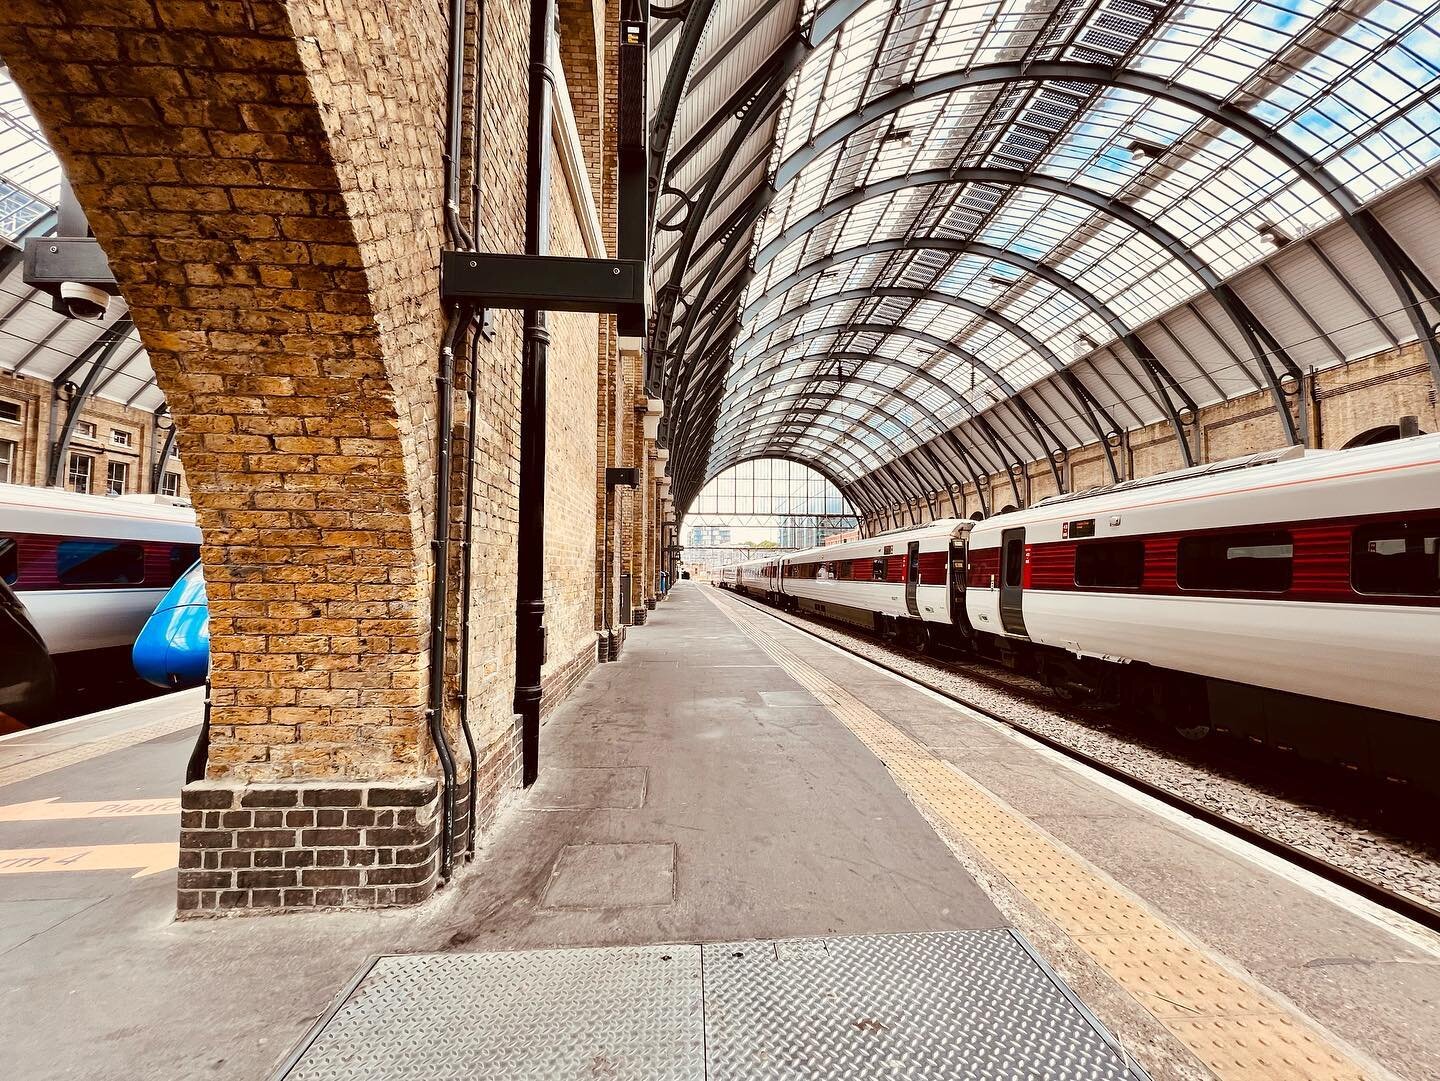 Platform 9/4 this way! 

You need a ticket to get on to the platforms at London&rsquo;s King&rsquo;s Cross, but thankfully our guide got us access without (granted, we also had tickets from KGX to Edinburgh a few days later so made it on to the platf